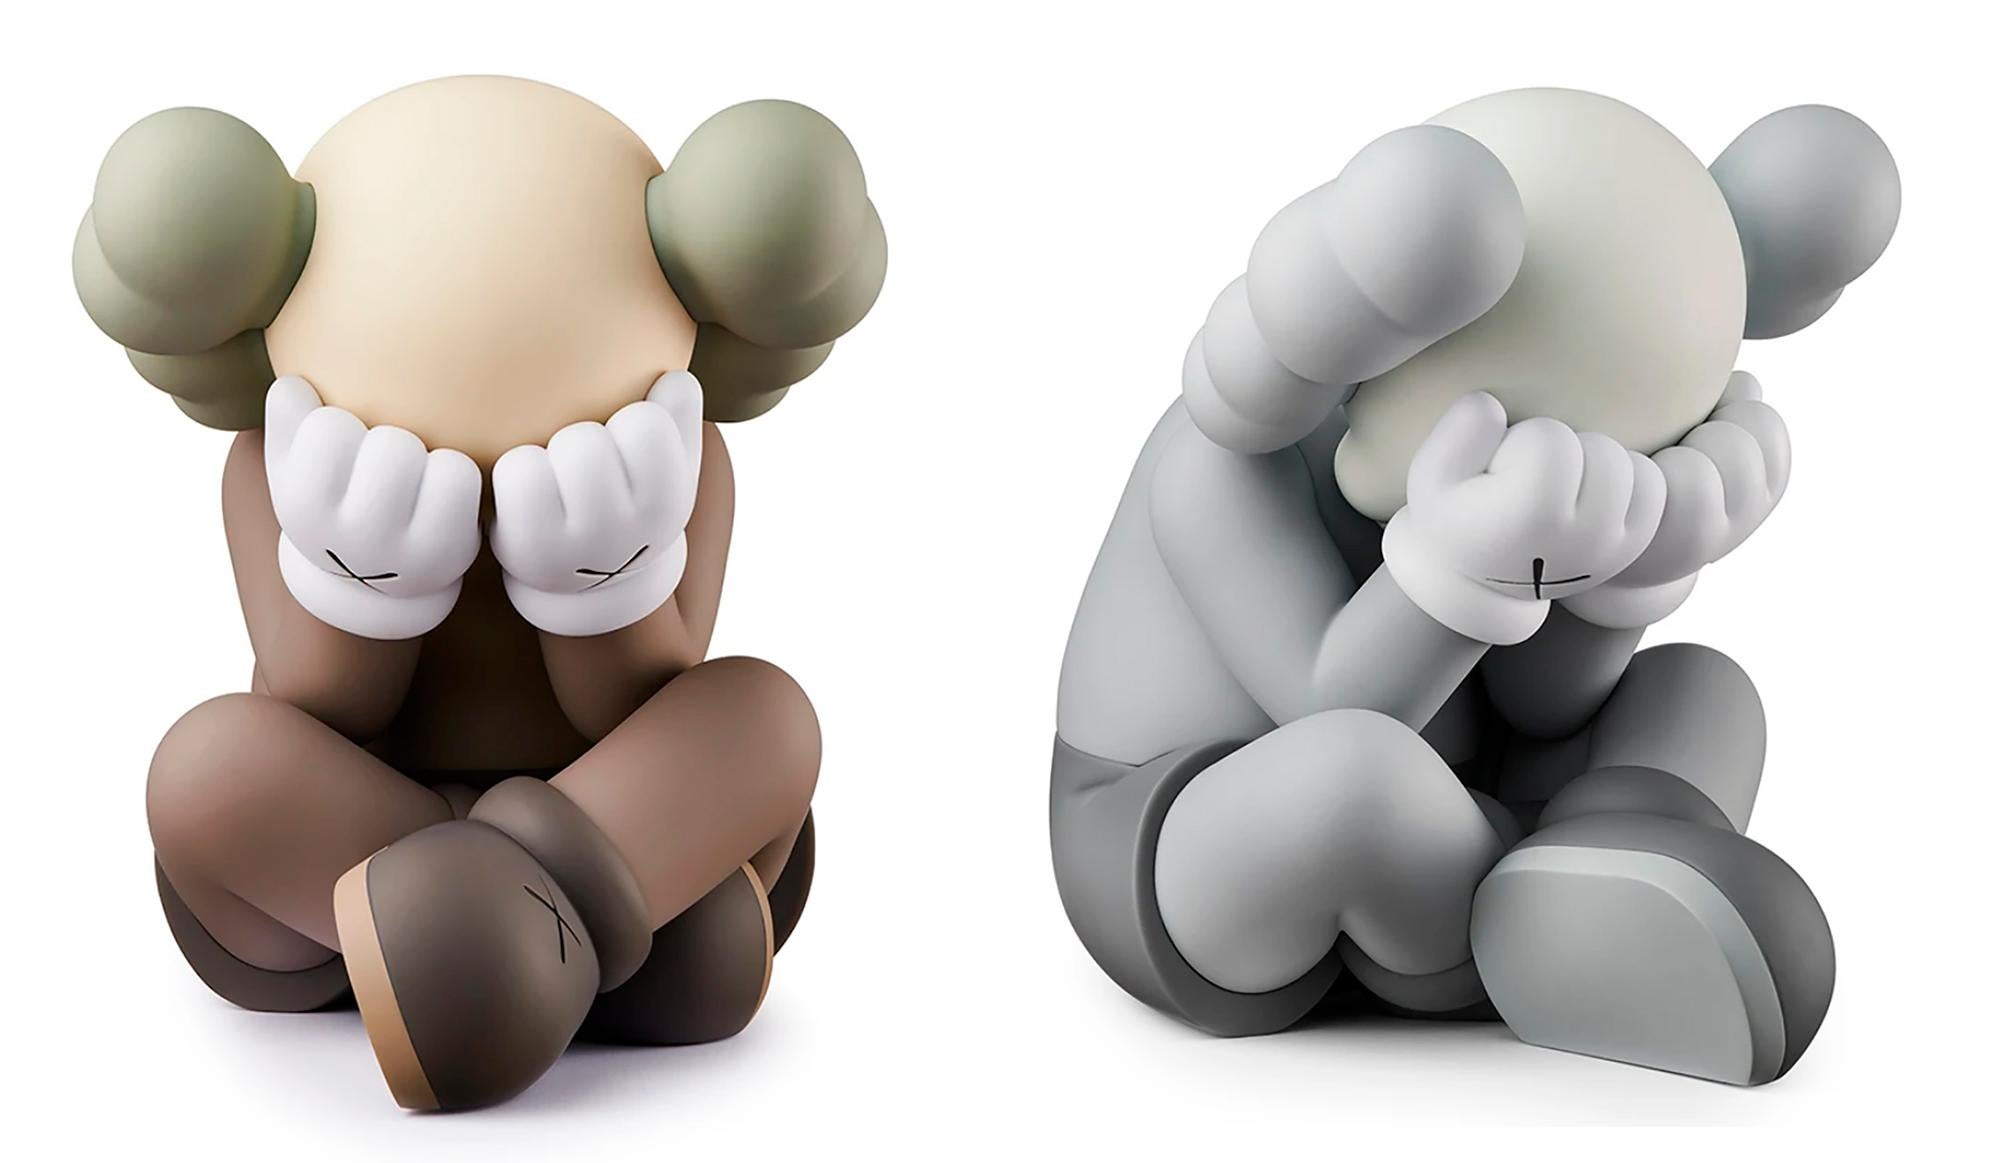 KAWS SEPARATED Companion (set of 2 works)